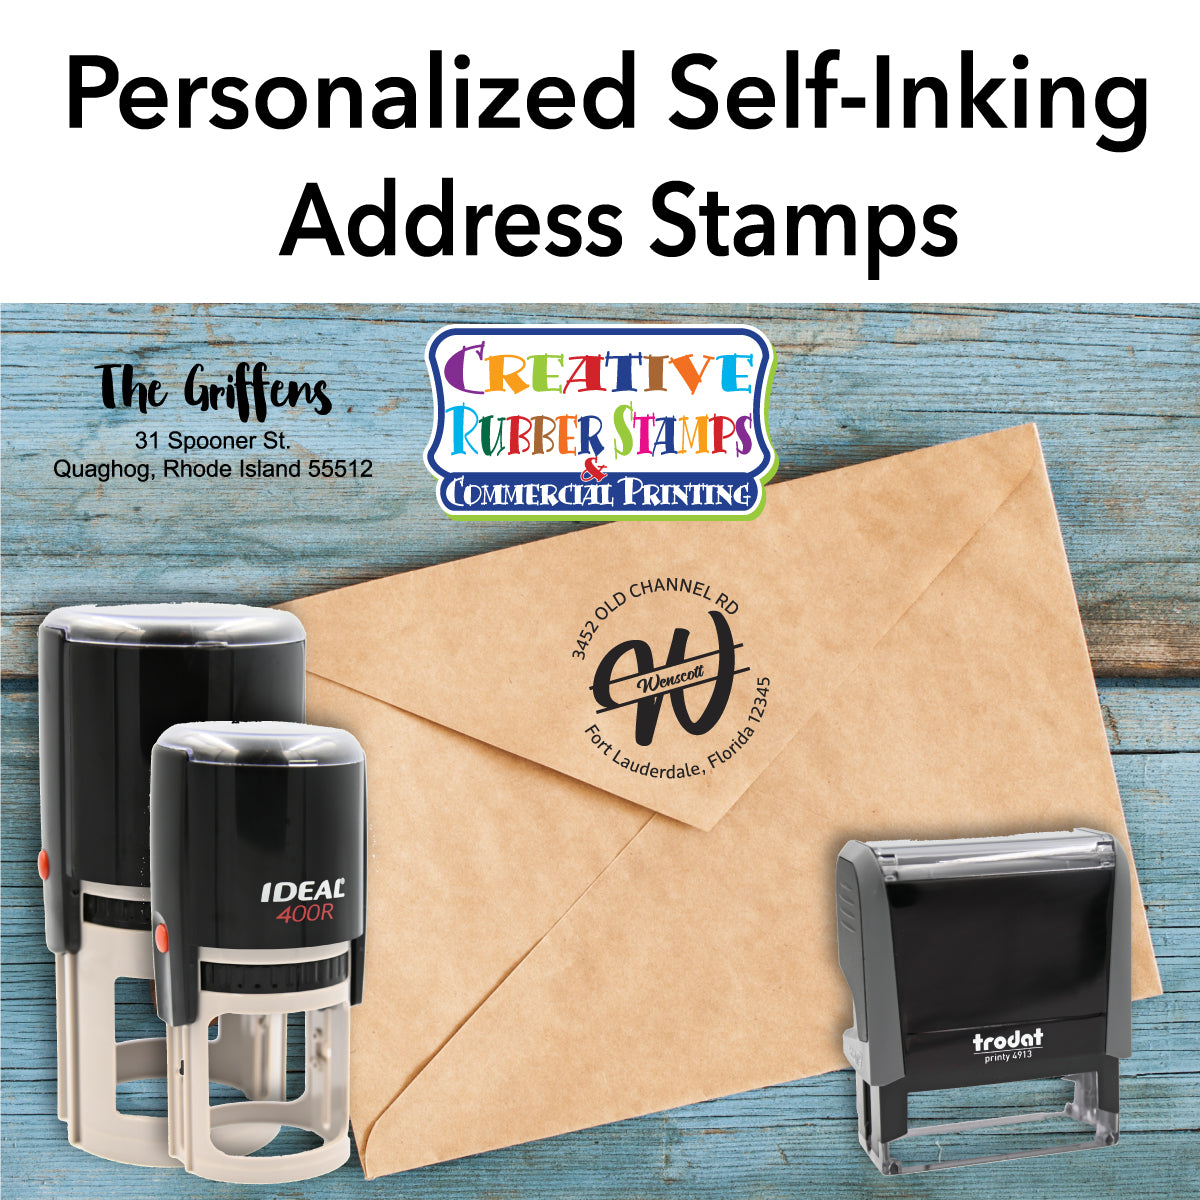 Personalized Self-Inking Address Stamps